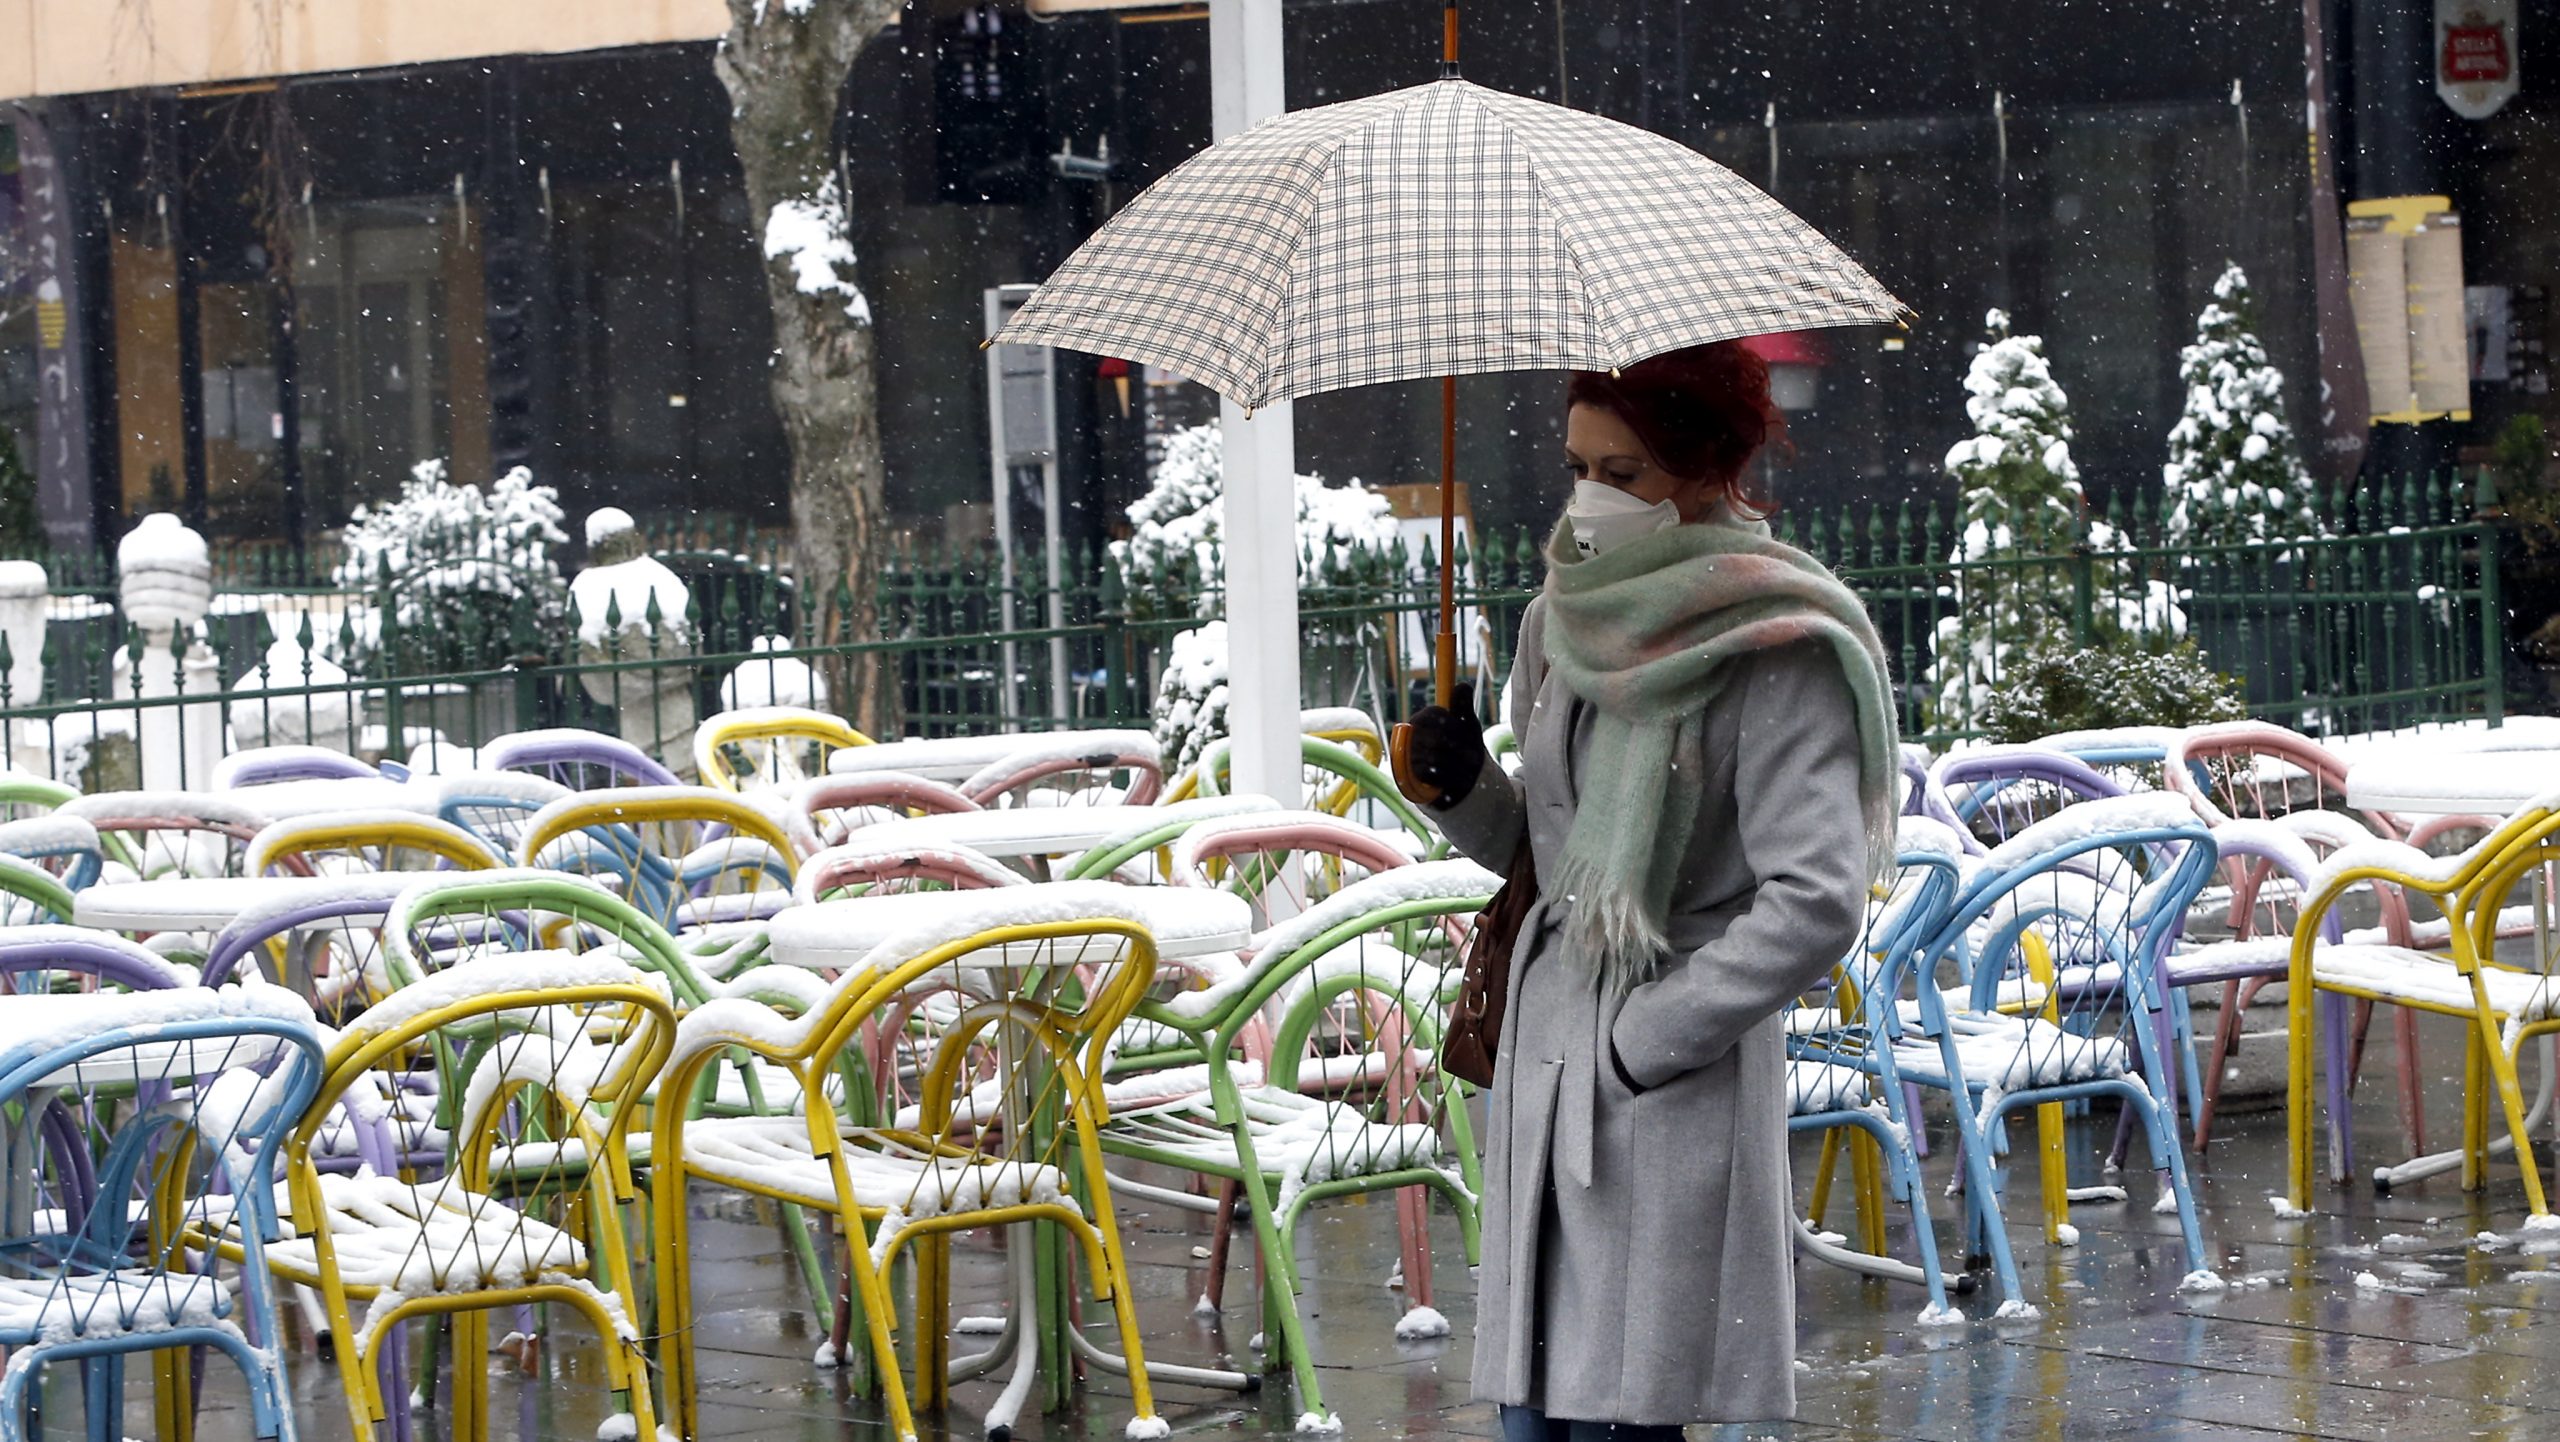 epa08318375 A woman wearing a face mask holds up an umbrella to shield herself from heavy snowfall in Sarajevo, Bosnia and Herzegovina, 24 March 2020. Several European countries have closed borders, schools, public facilities, and have canceled most major sports and entertainment events, in order to prevent the spread of the SARS-CoV-2 coronavirus, which causes the COVID-19 disease.  EPA/FEHIM DEMIR